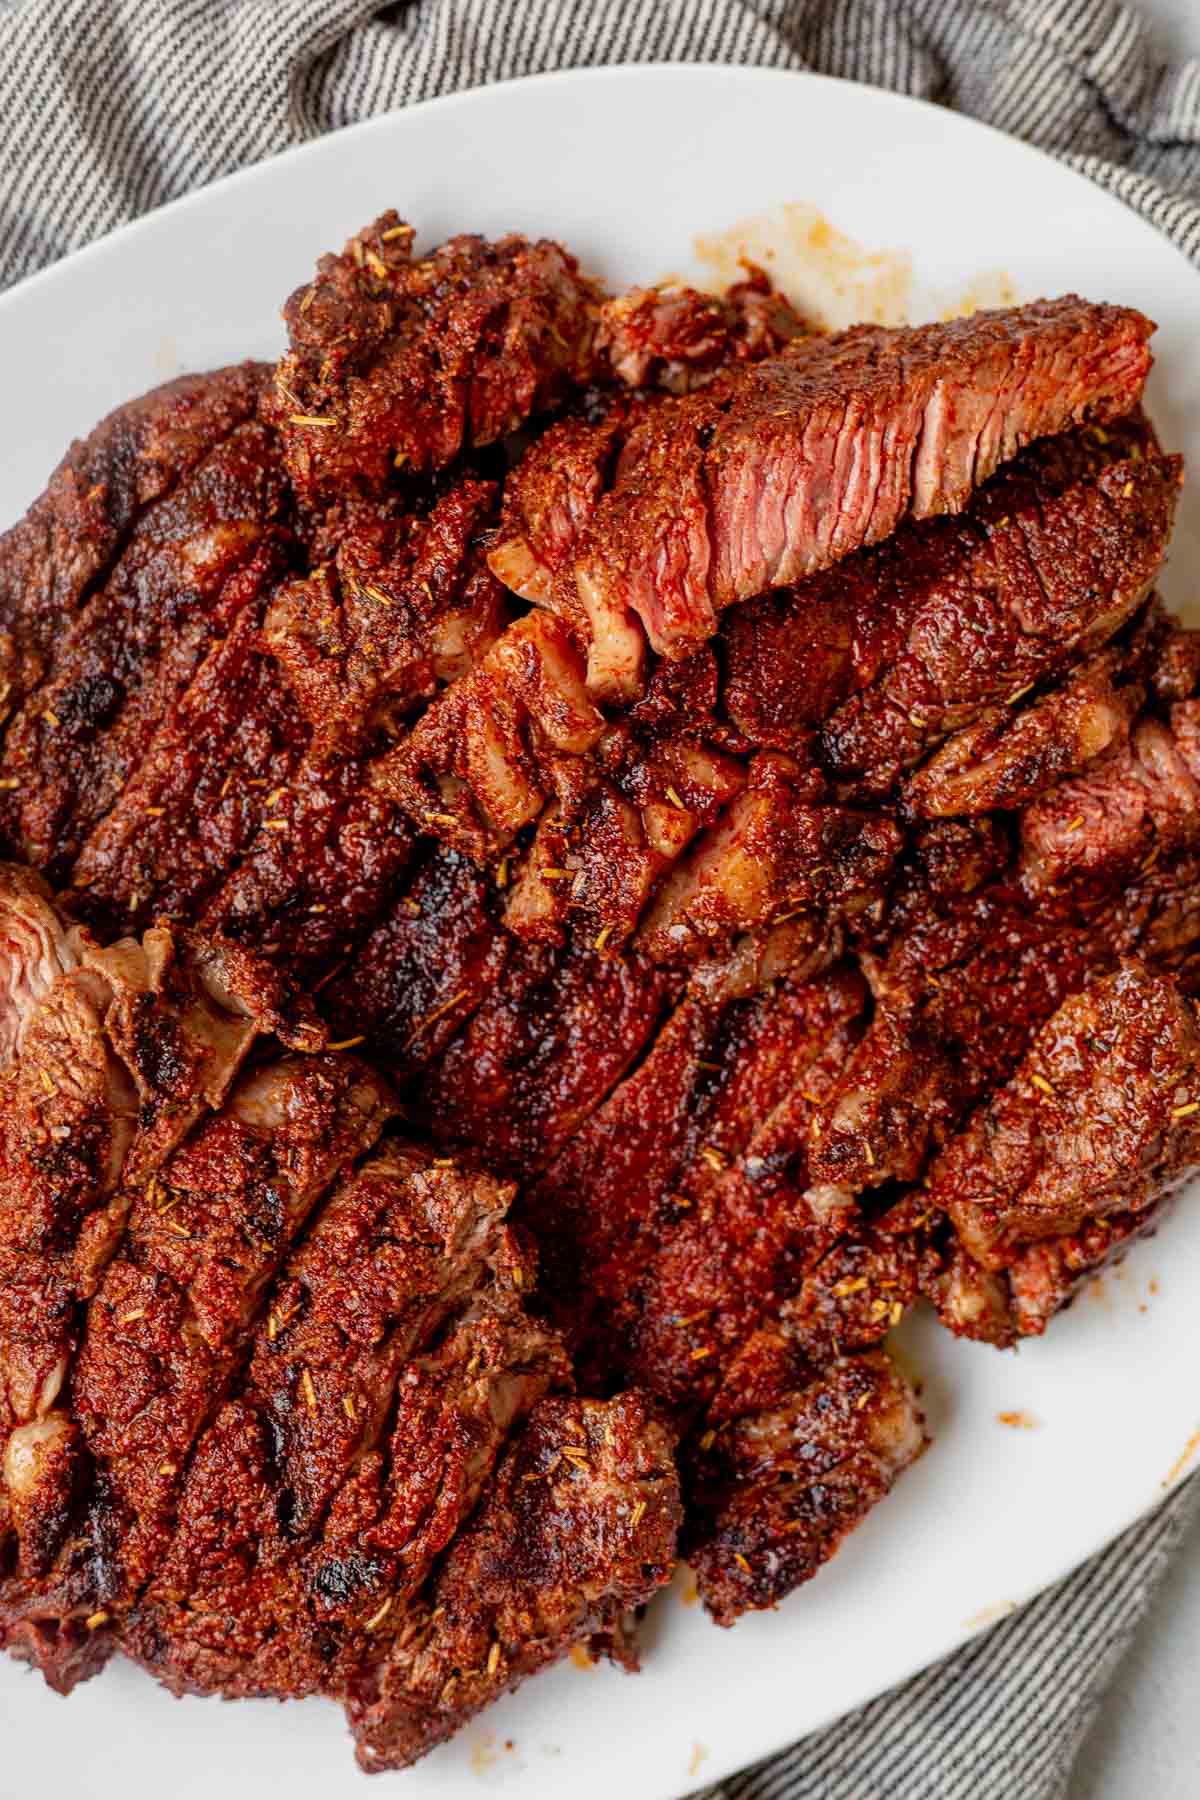 a plate of grilled and sliced steak